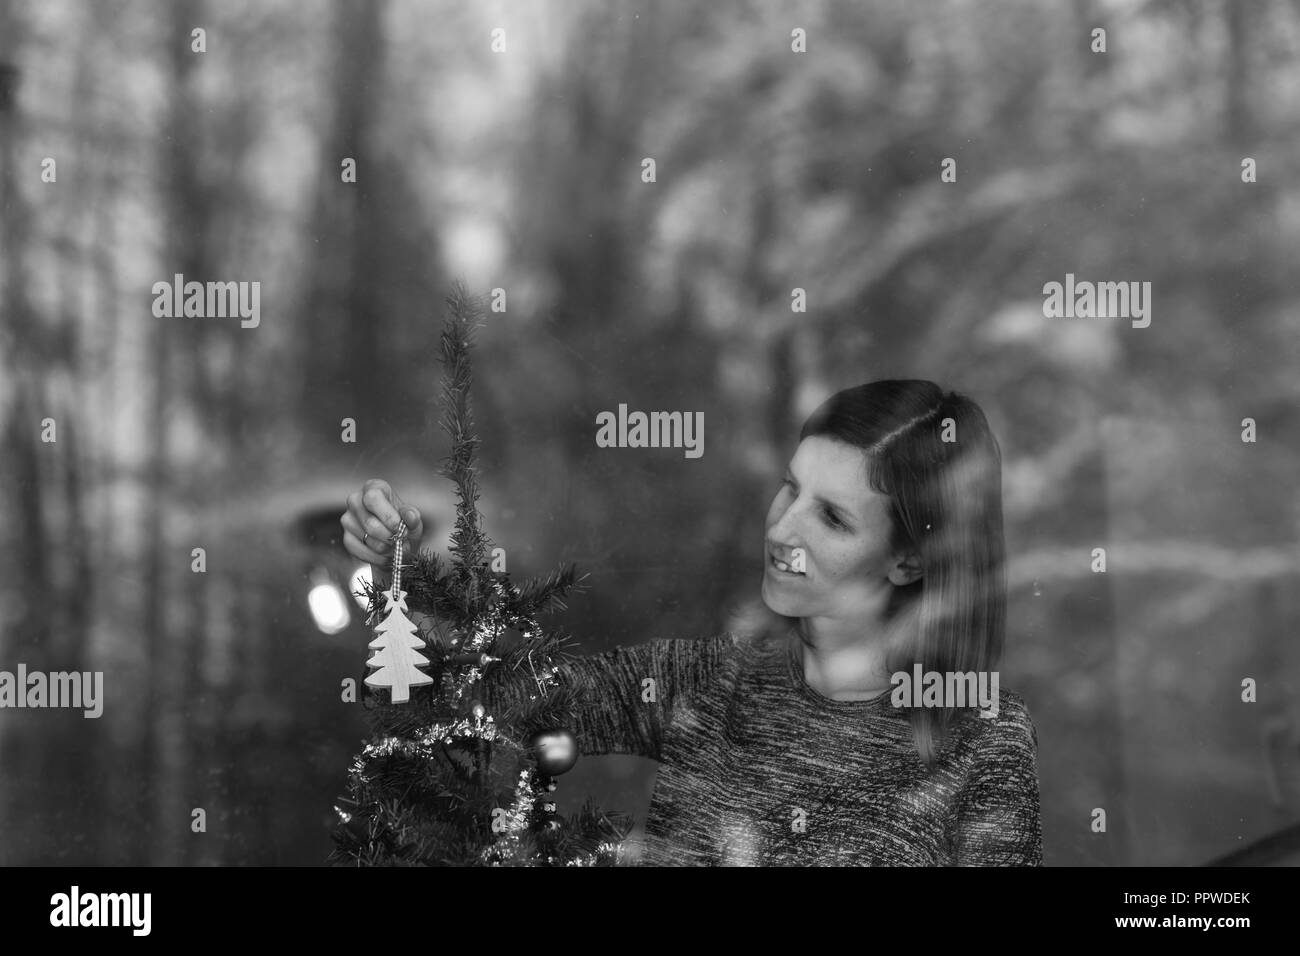 Monochrome image of a young woman placing wooden holiday ornament on a Christmas tree. View through a window. Stock Photo